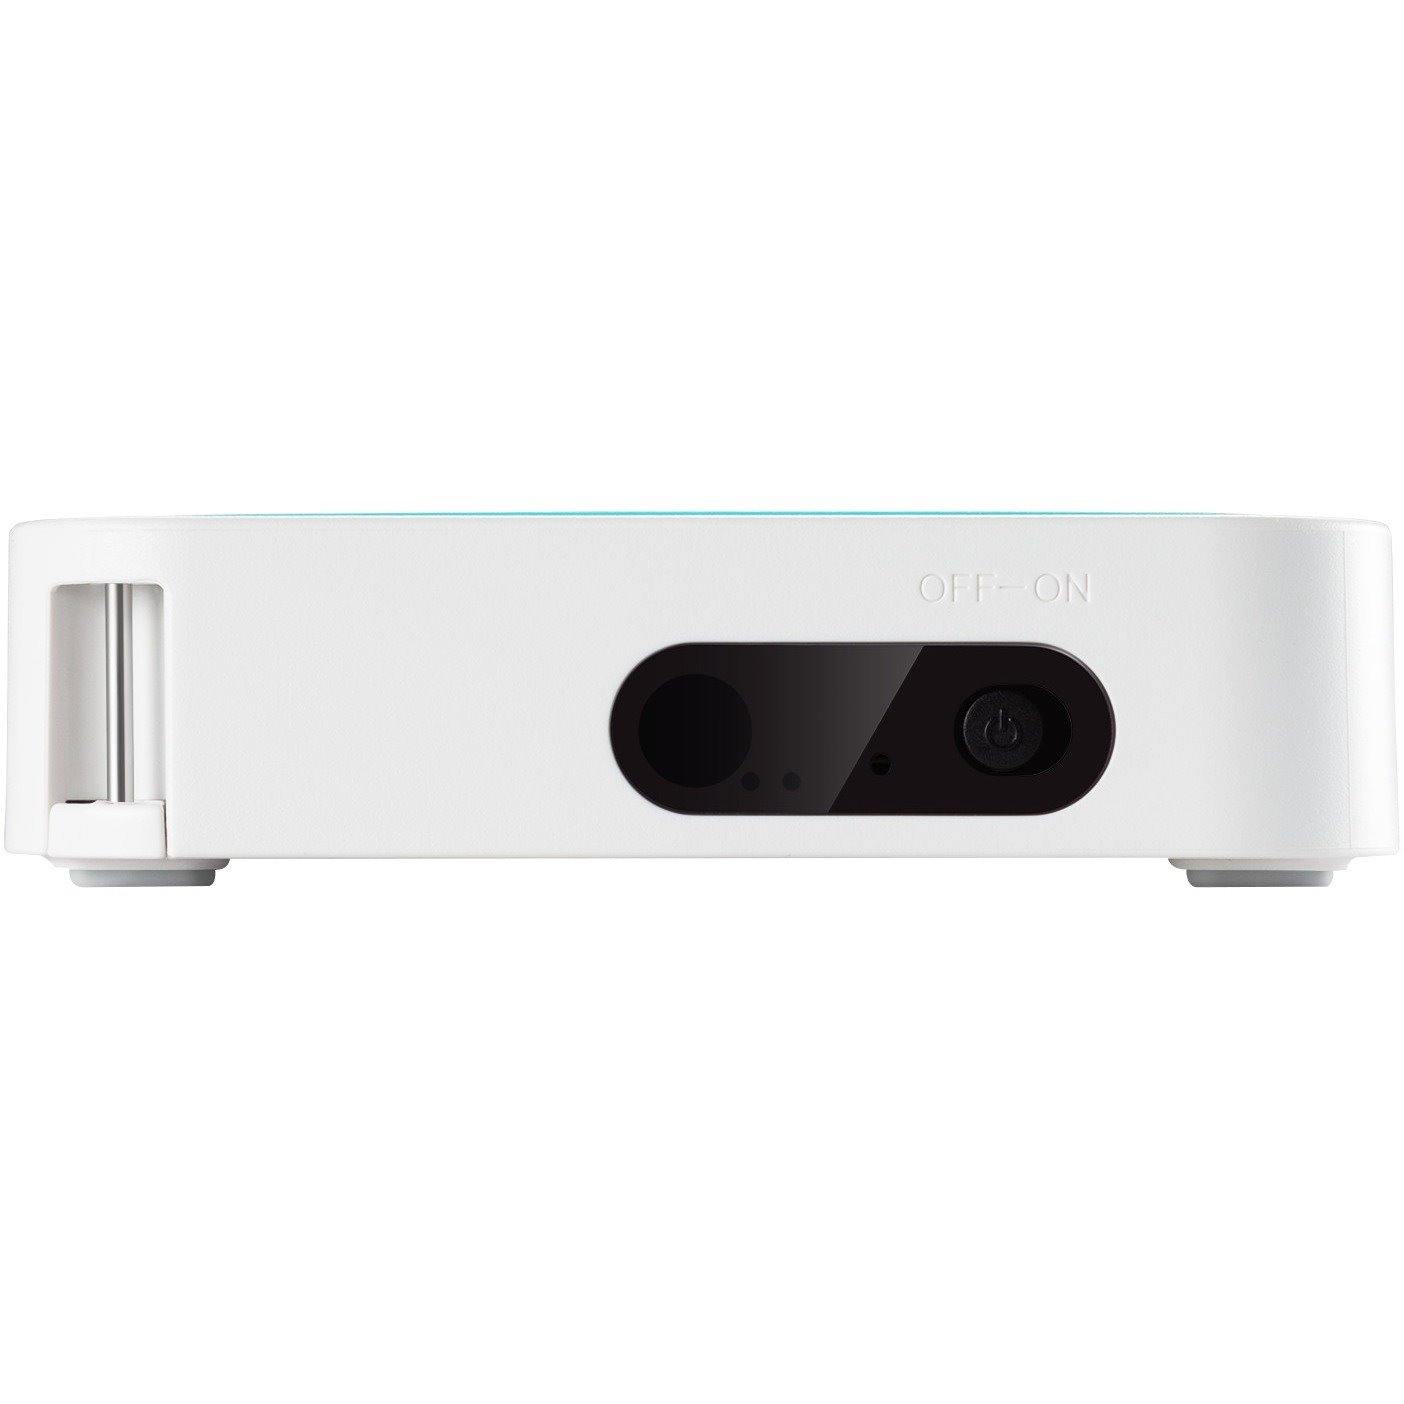 ViewSonic M1 mini Plus 3D Ready LED Projector - 16:9 - Portable, Ceiling Mountable, Wall Mountable